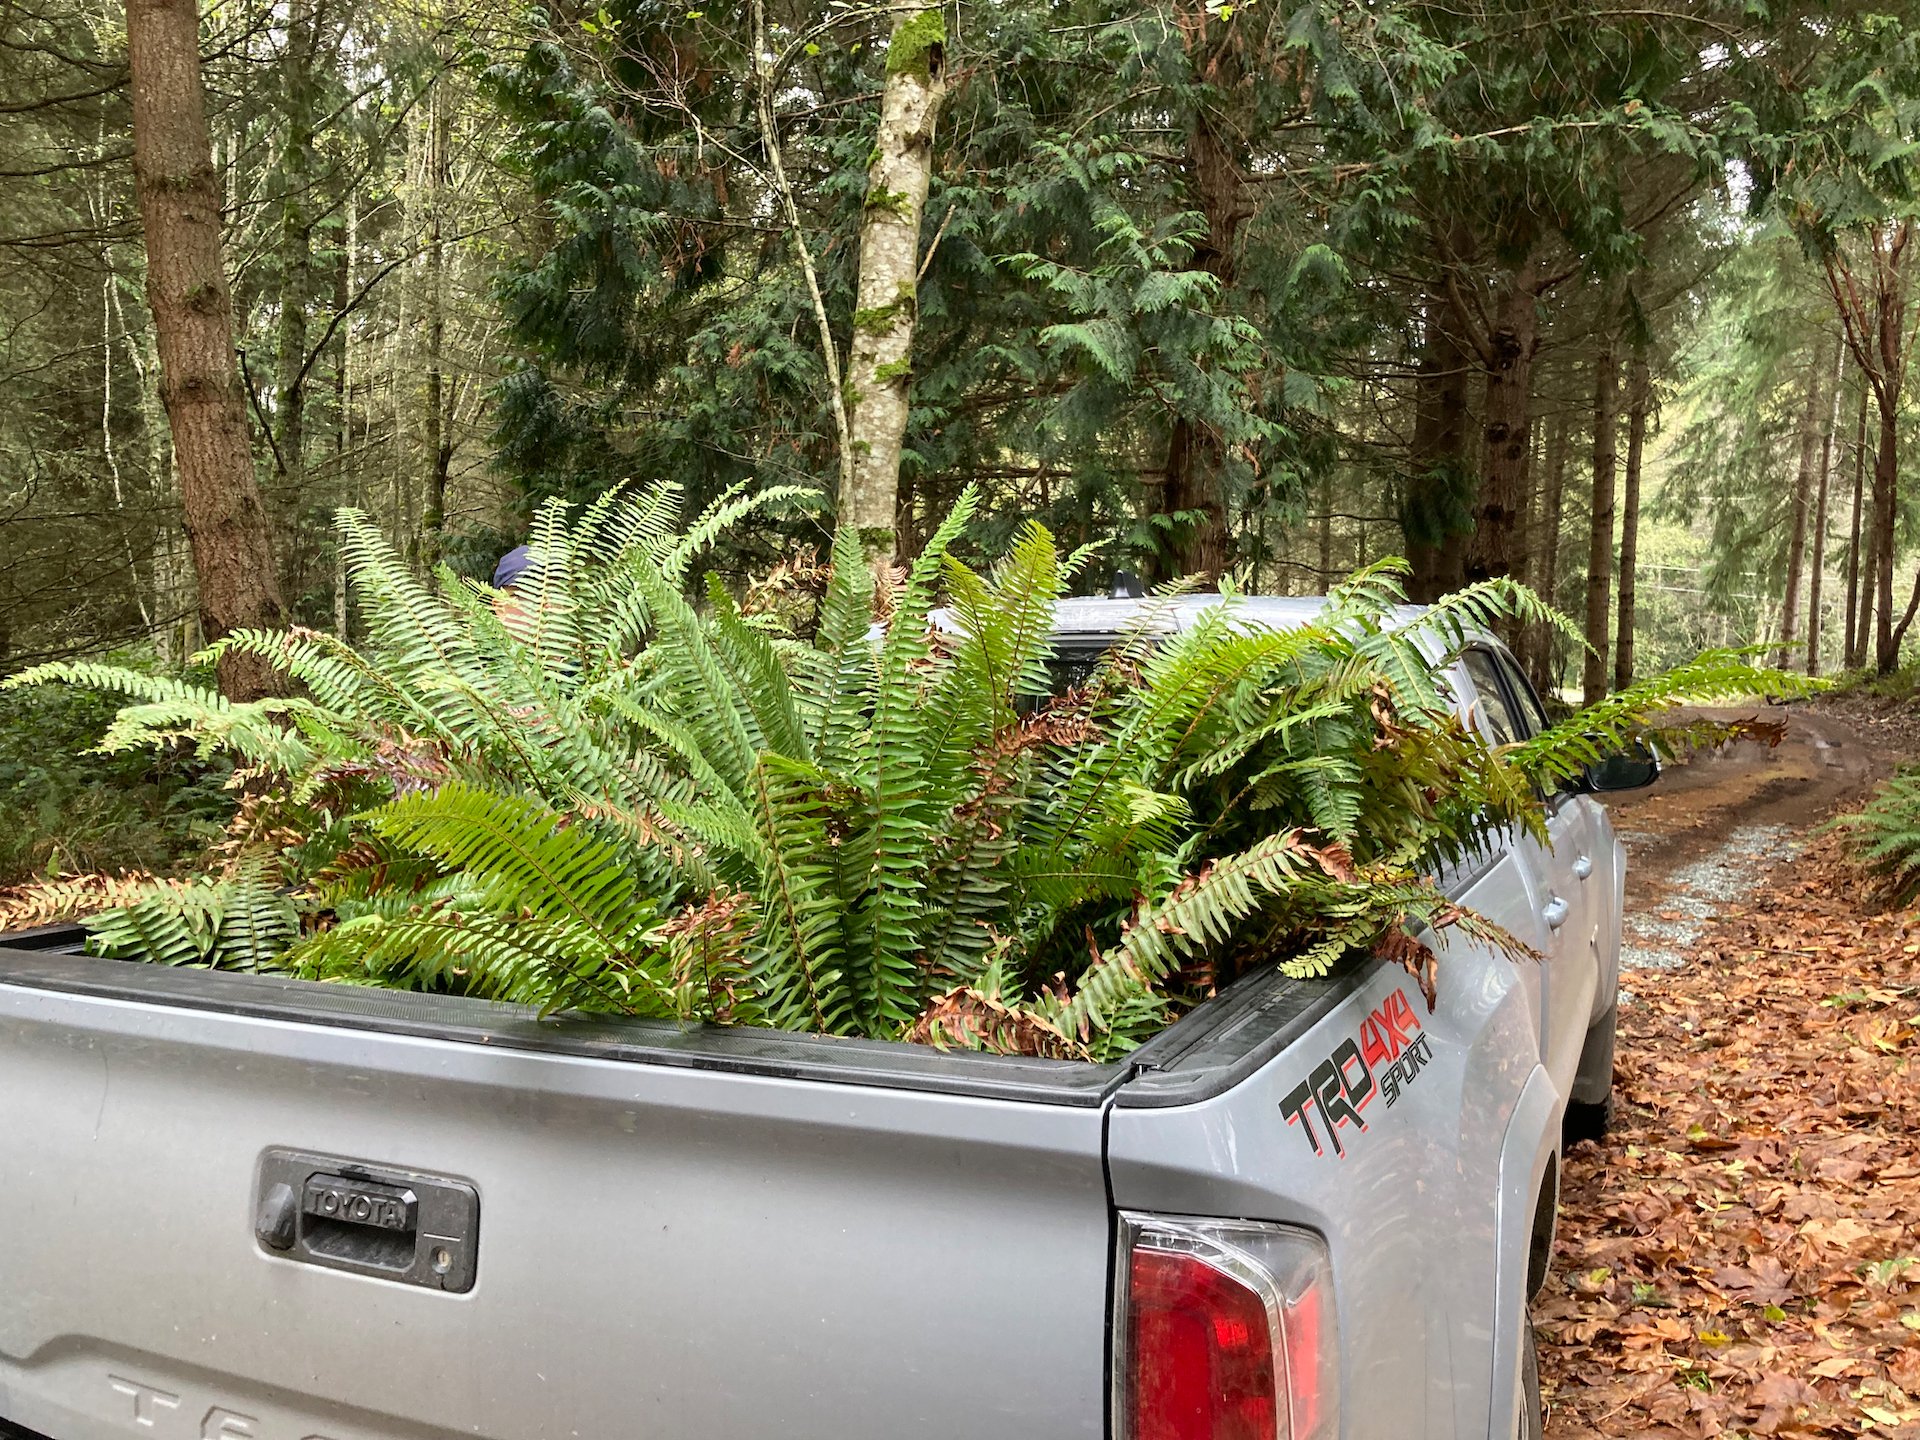  Lot’s of ferns, ready to head for home. 